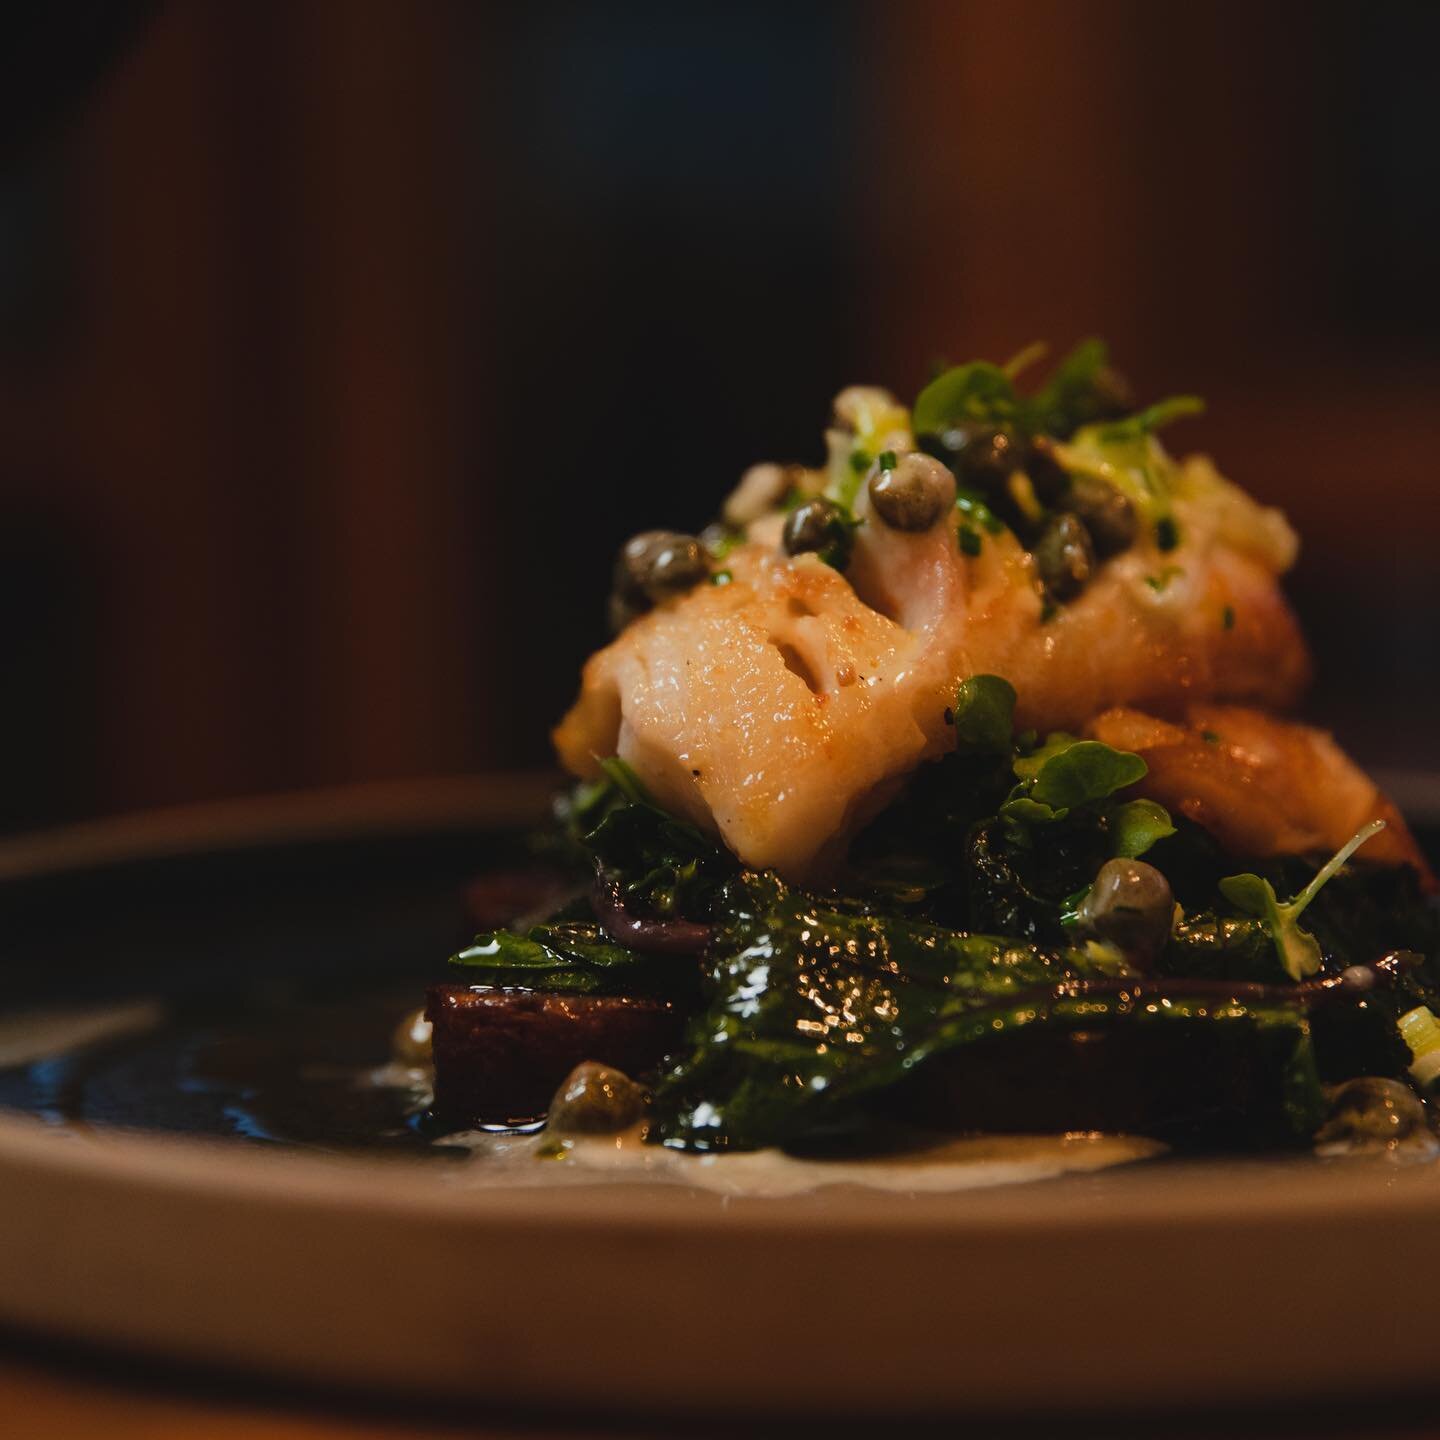 Looking for a light dinner tonight? Enter Butter-Poached Sablefish.
Served with purple potatoes, wilted kale, caper and leek beurre blanc.

Full menu available at the link in our bio.